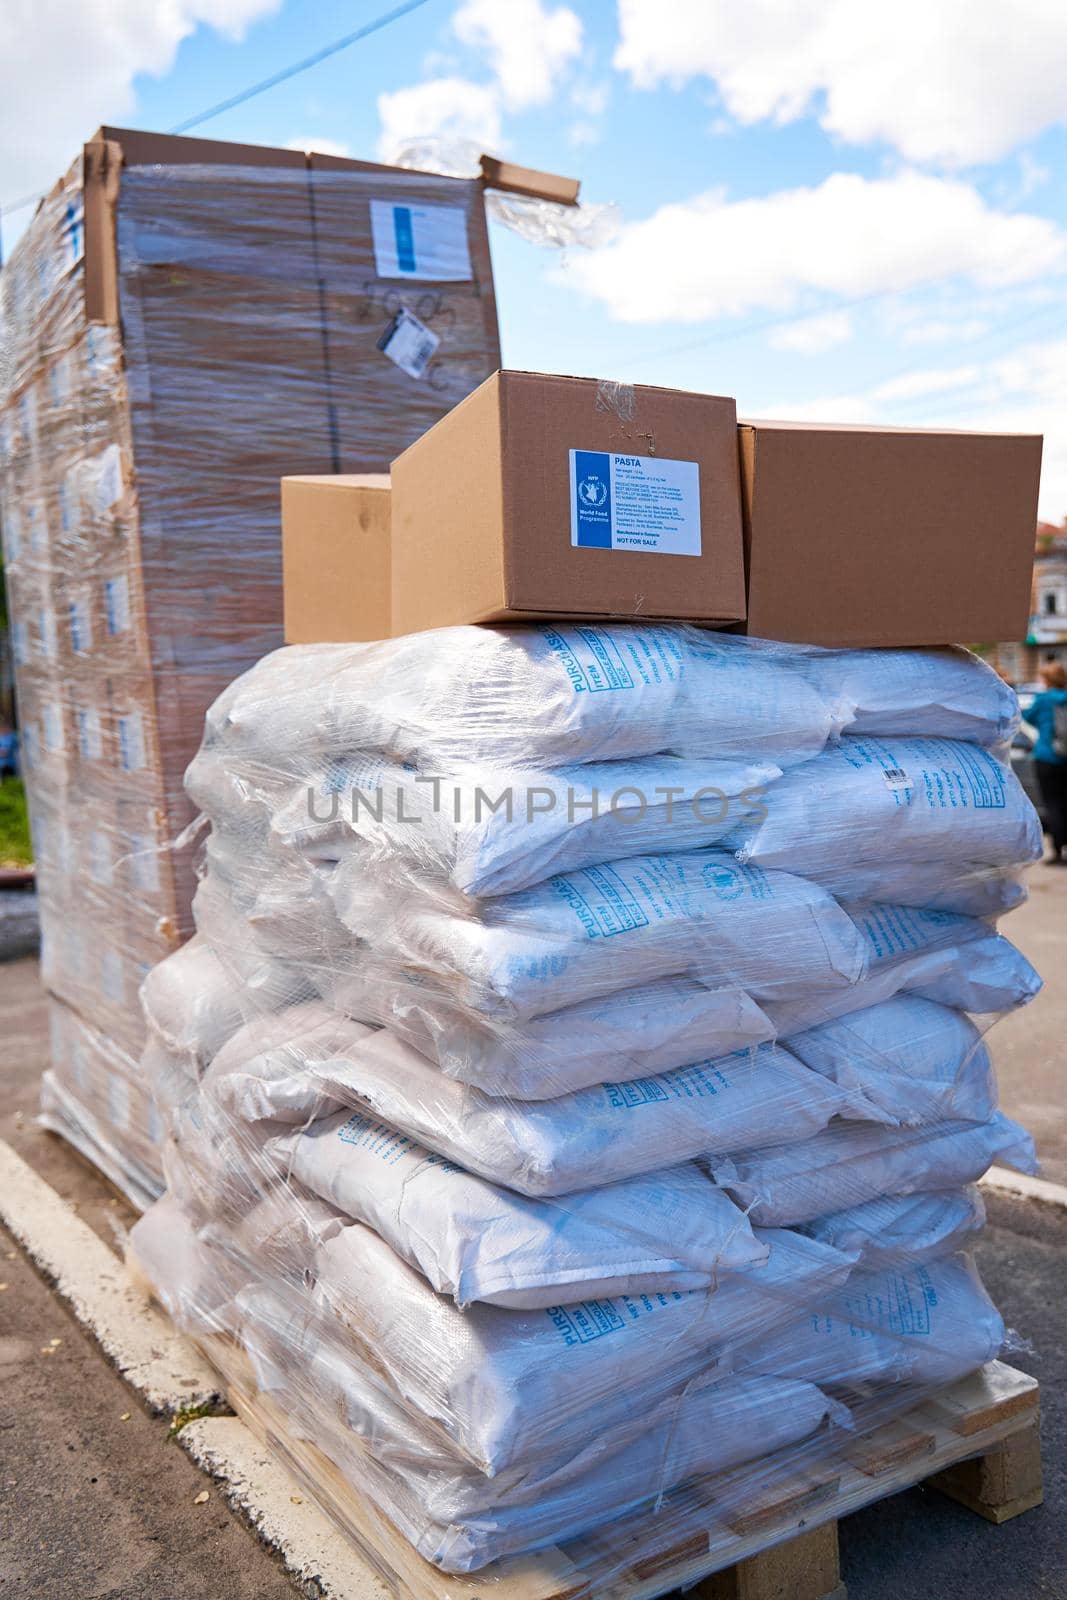 Humanitarian food aid unloaded in front of humanitarian centre by Try_my_best